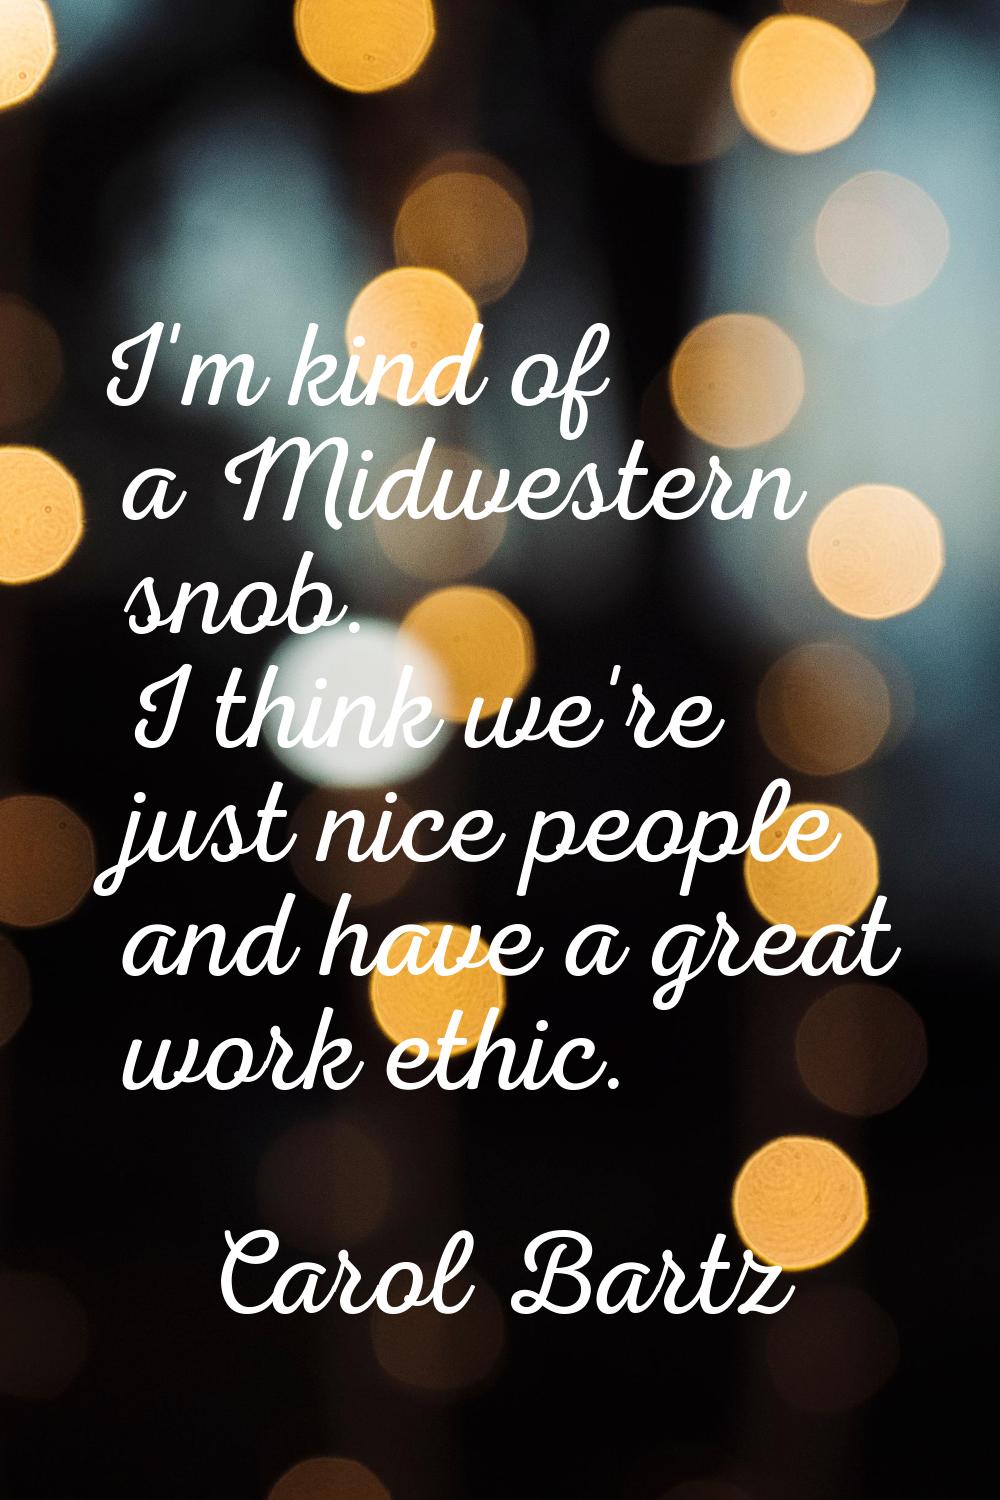 I'm kind of a Midwestern snob. I think we're just nice people and have a great work ethic.